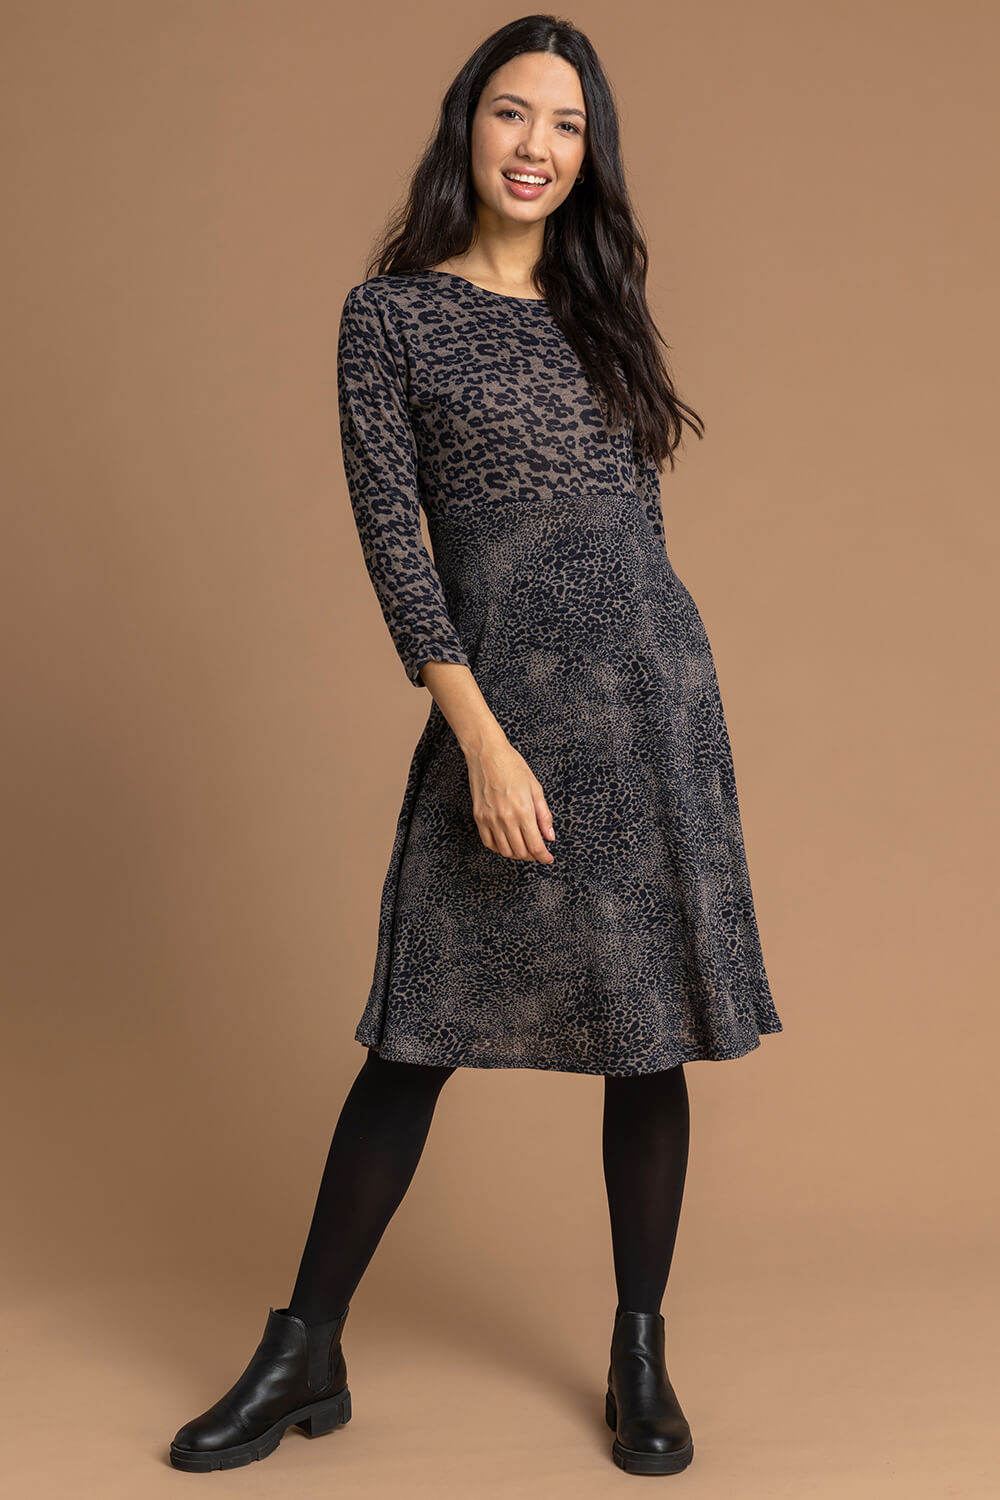 Taupe Contrast Animal Fit & Flare Dress, Image 3 of 4